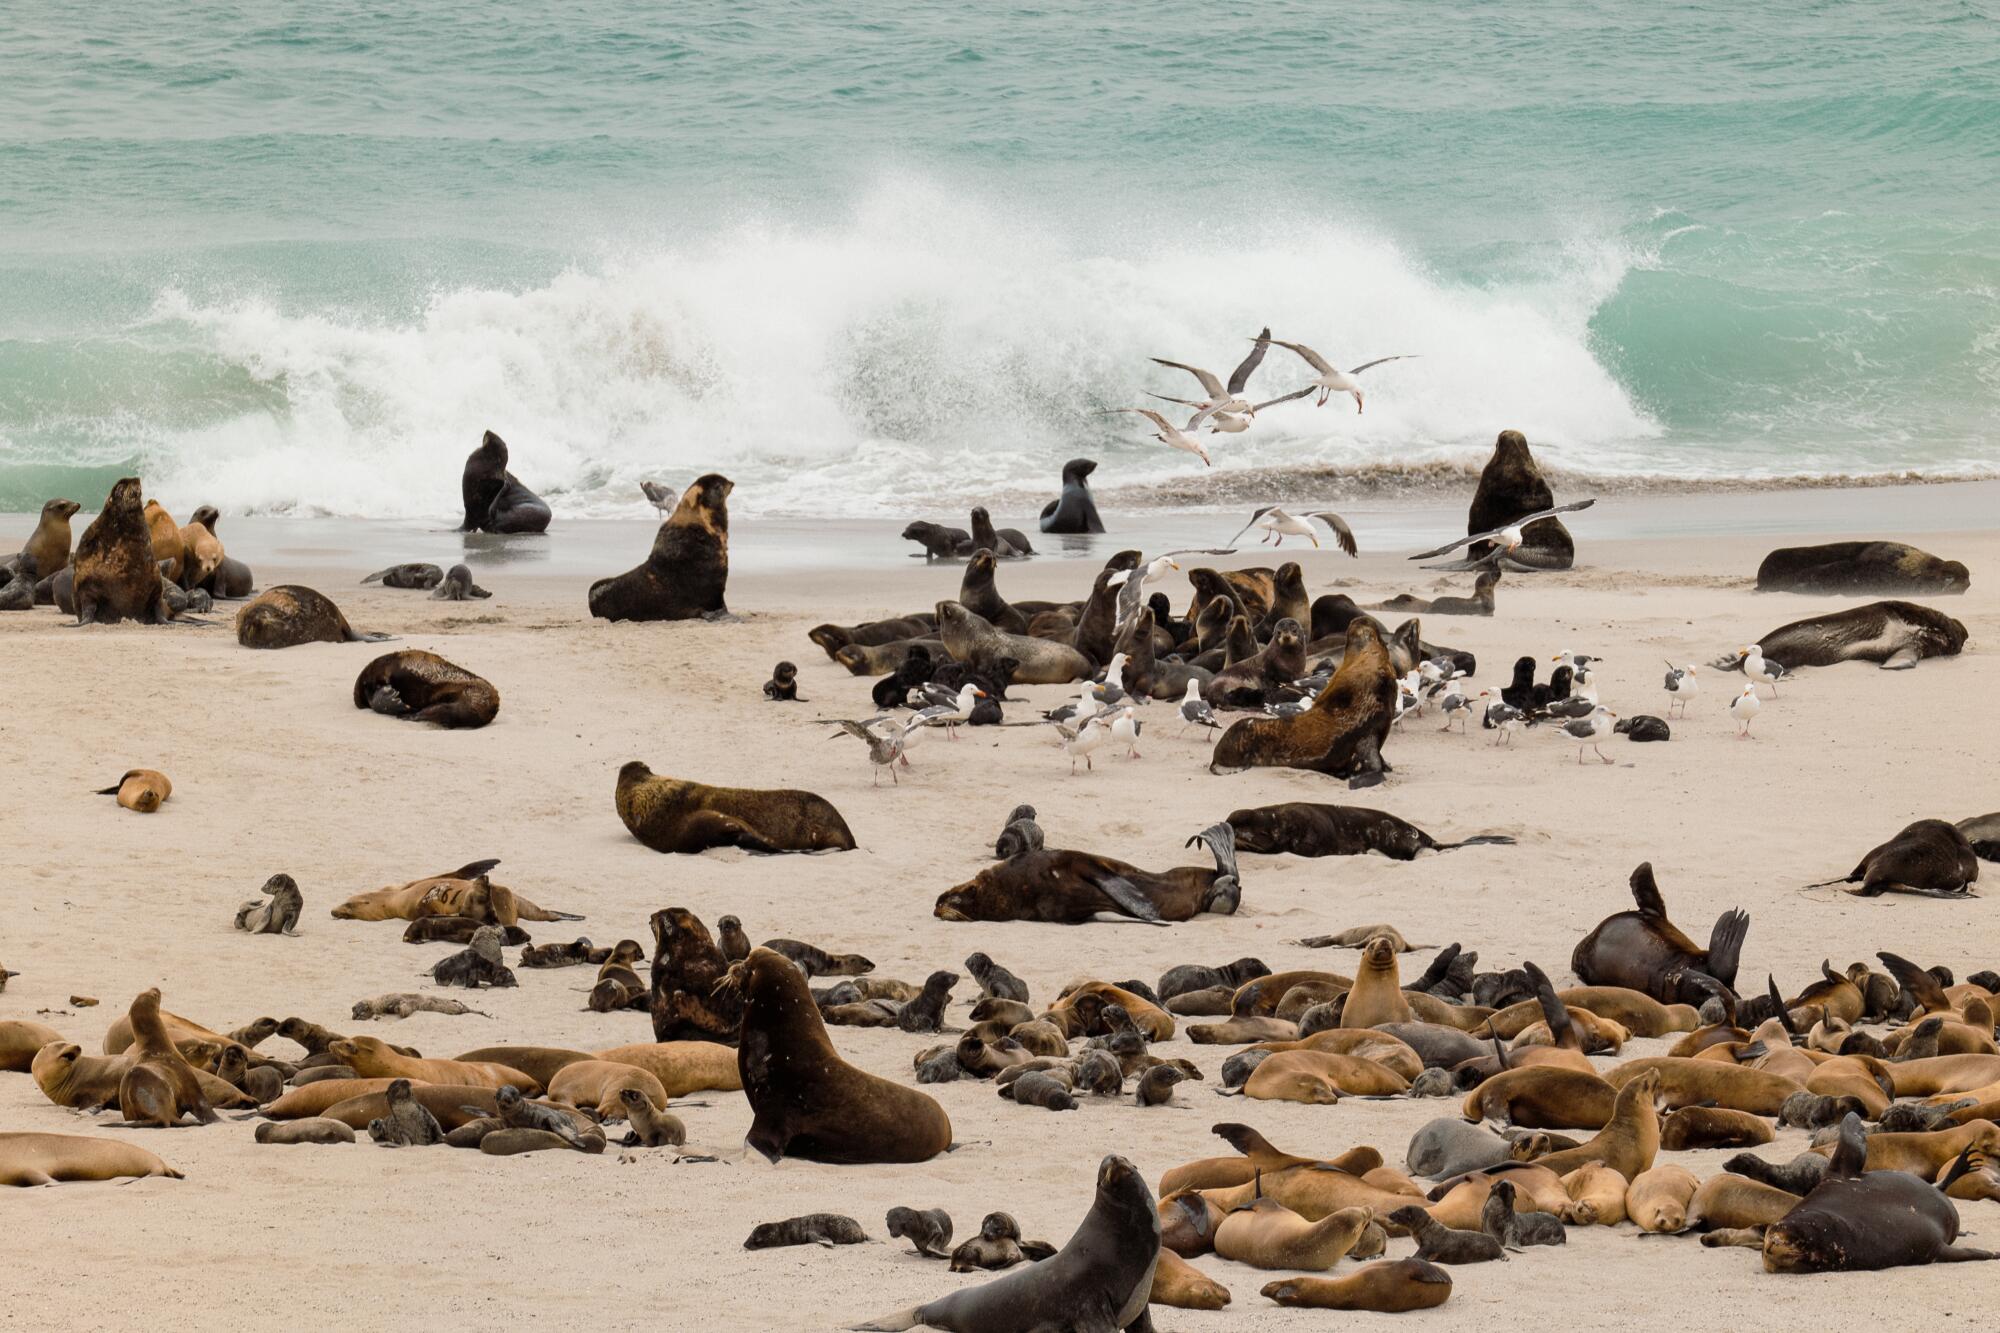 Seagulls, northern fur seals and sea lions converge at Point Bennett, San Miguel Island, off the California coast.